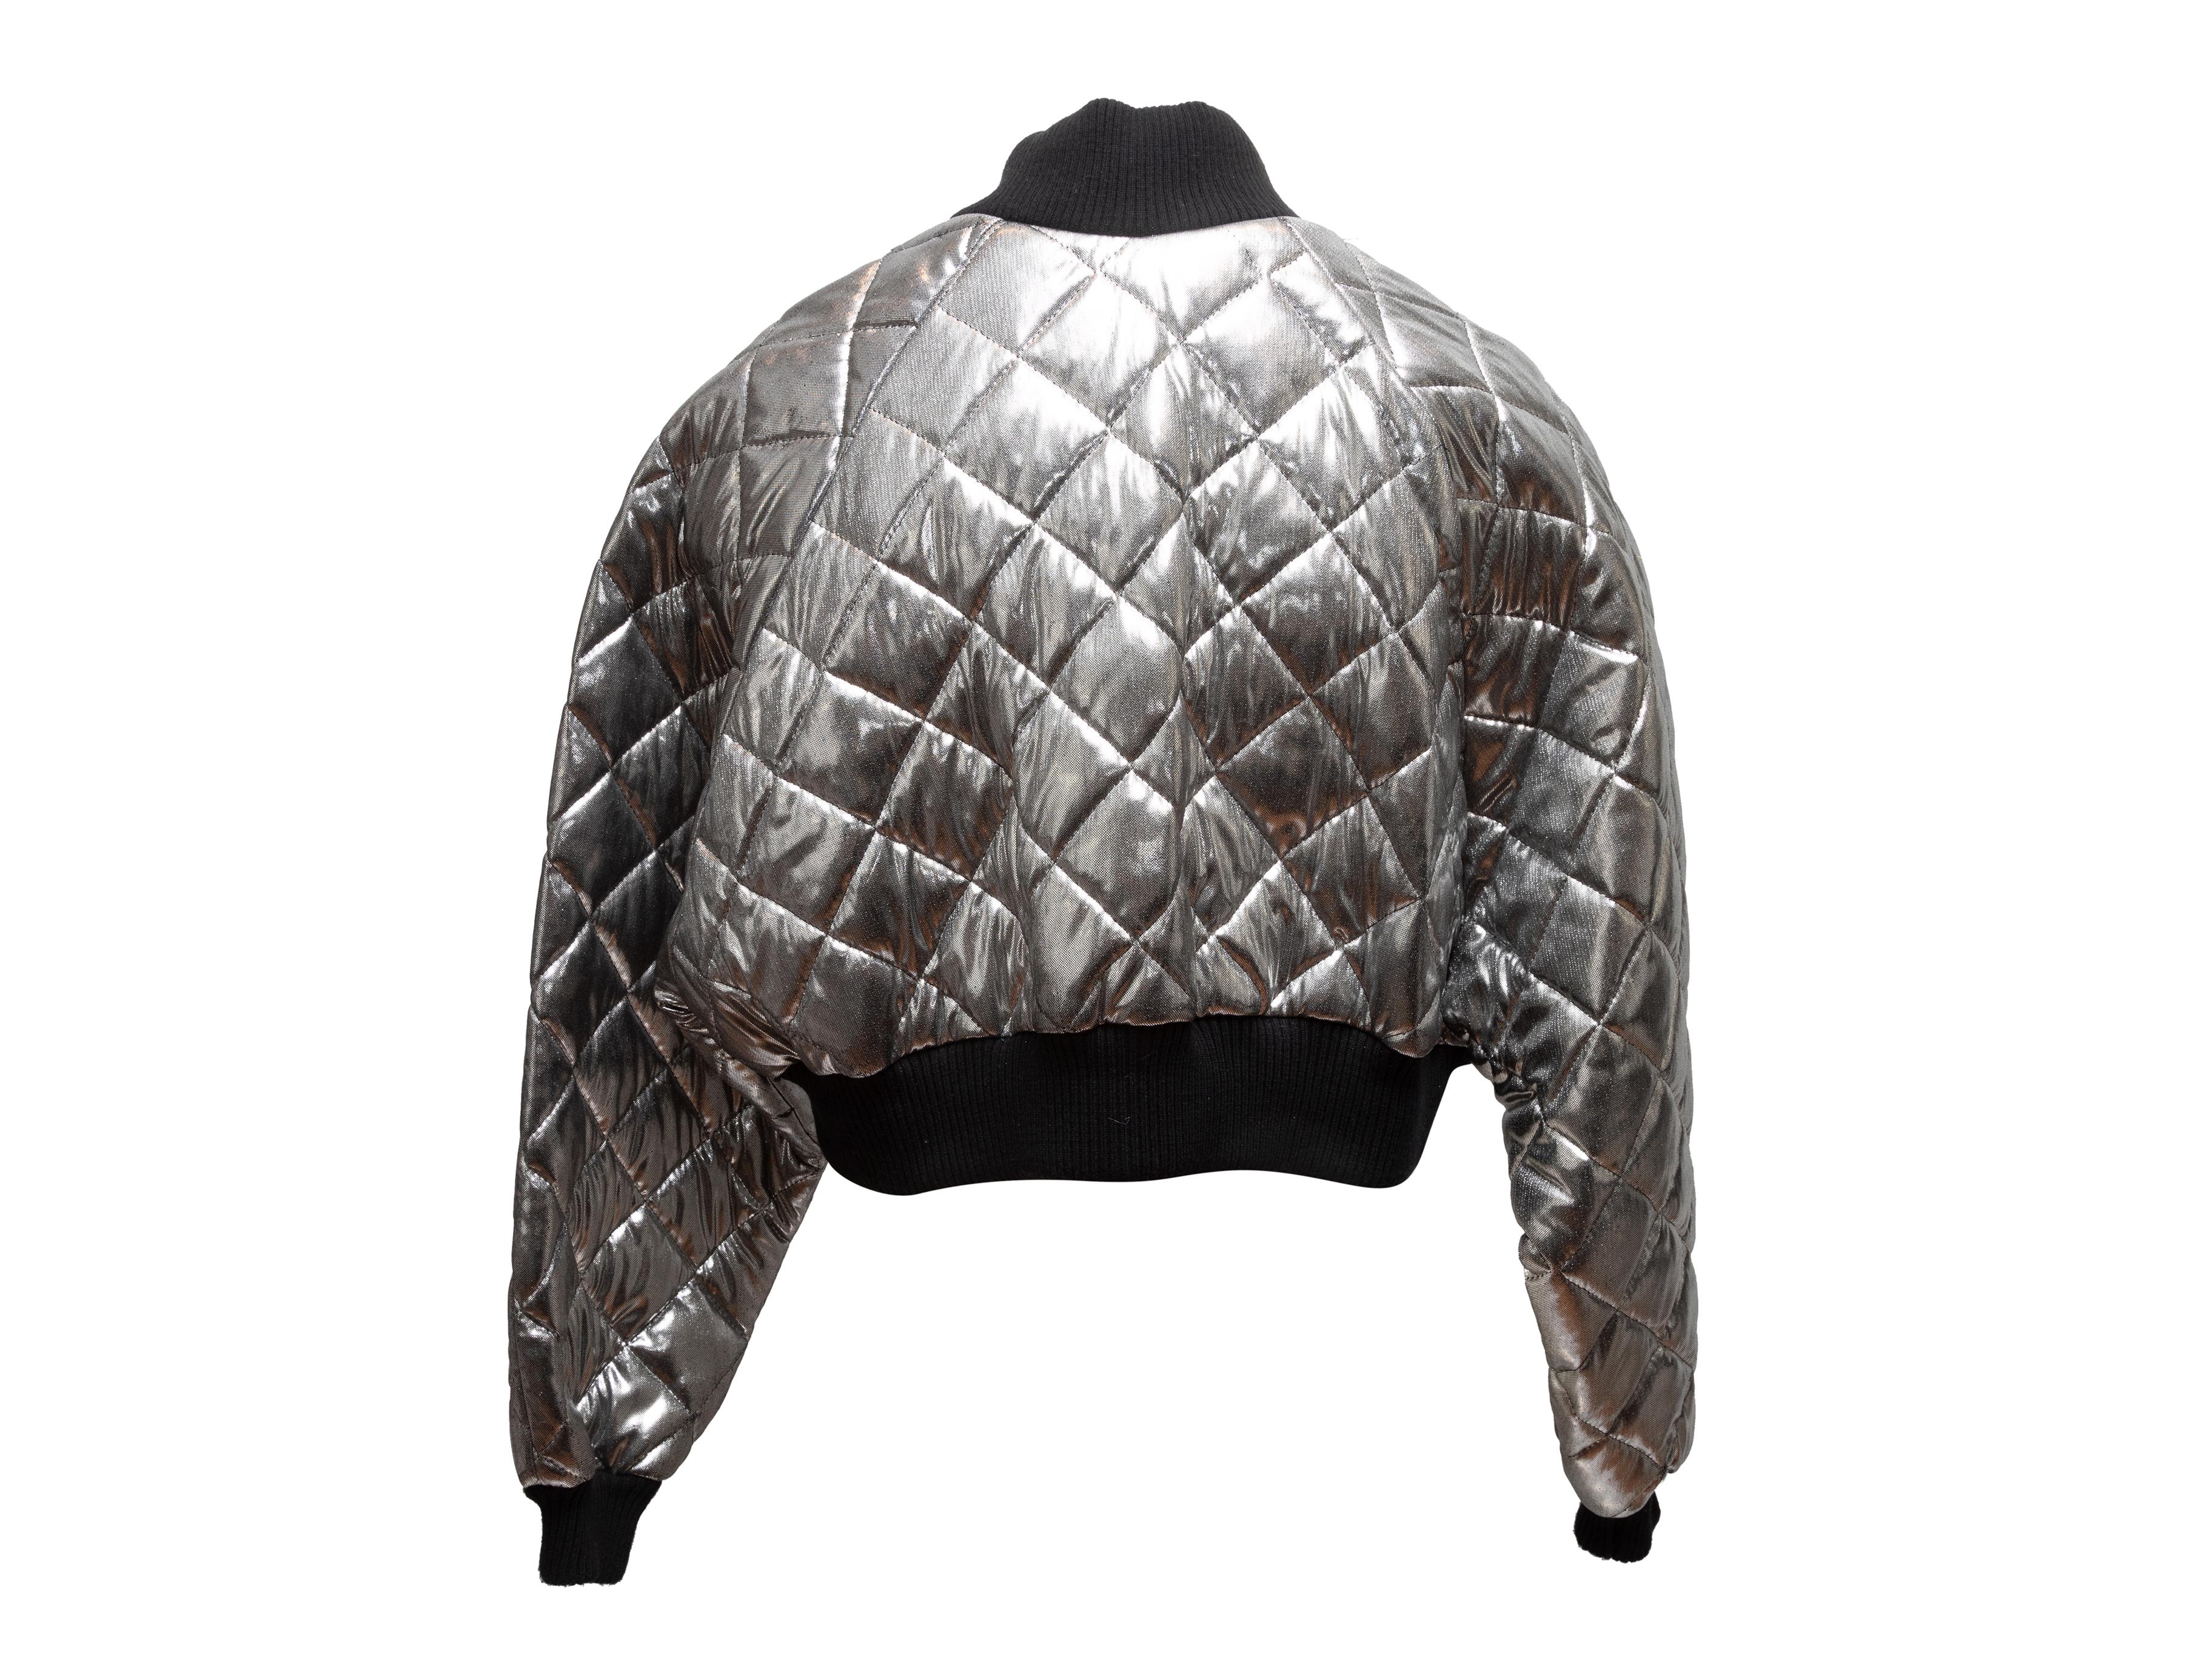 Vintage metallic silver and black quilted cropped bomber jacket by Betsey Johnson Punk Label. Circa 1980s. Snap front closures. 34